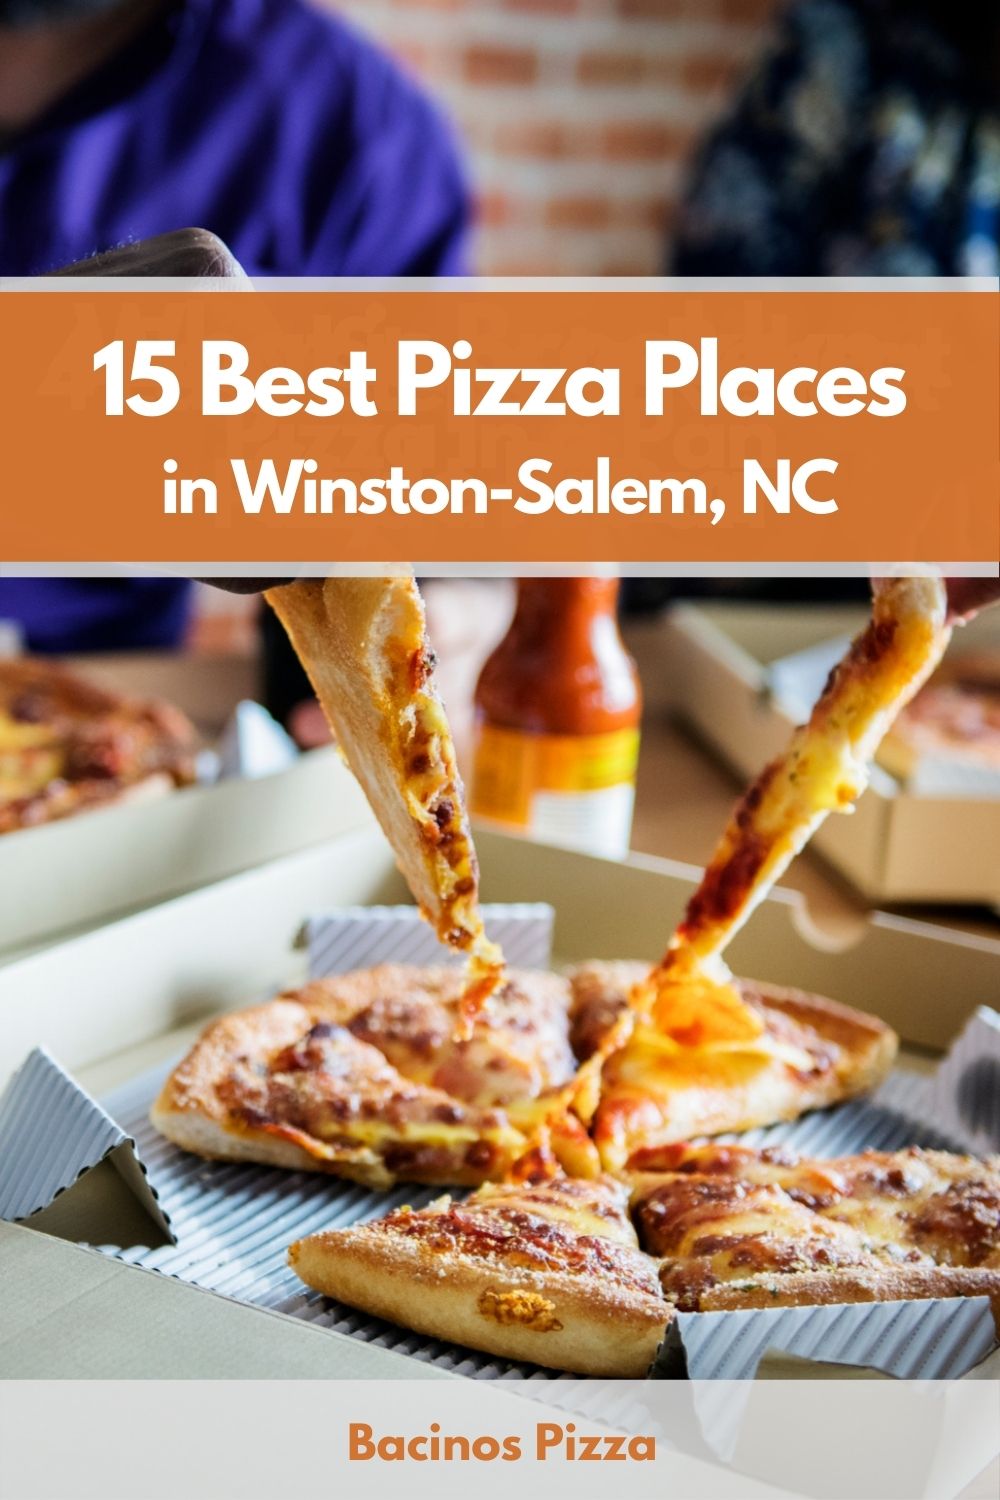 15 Best Pizza Places in Winston-Salem, NC pin